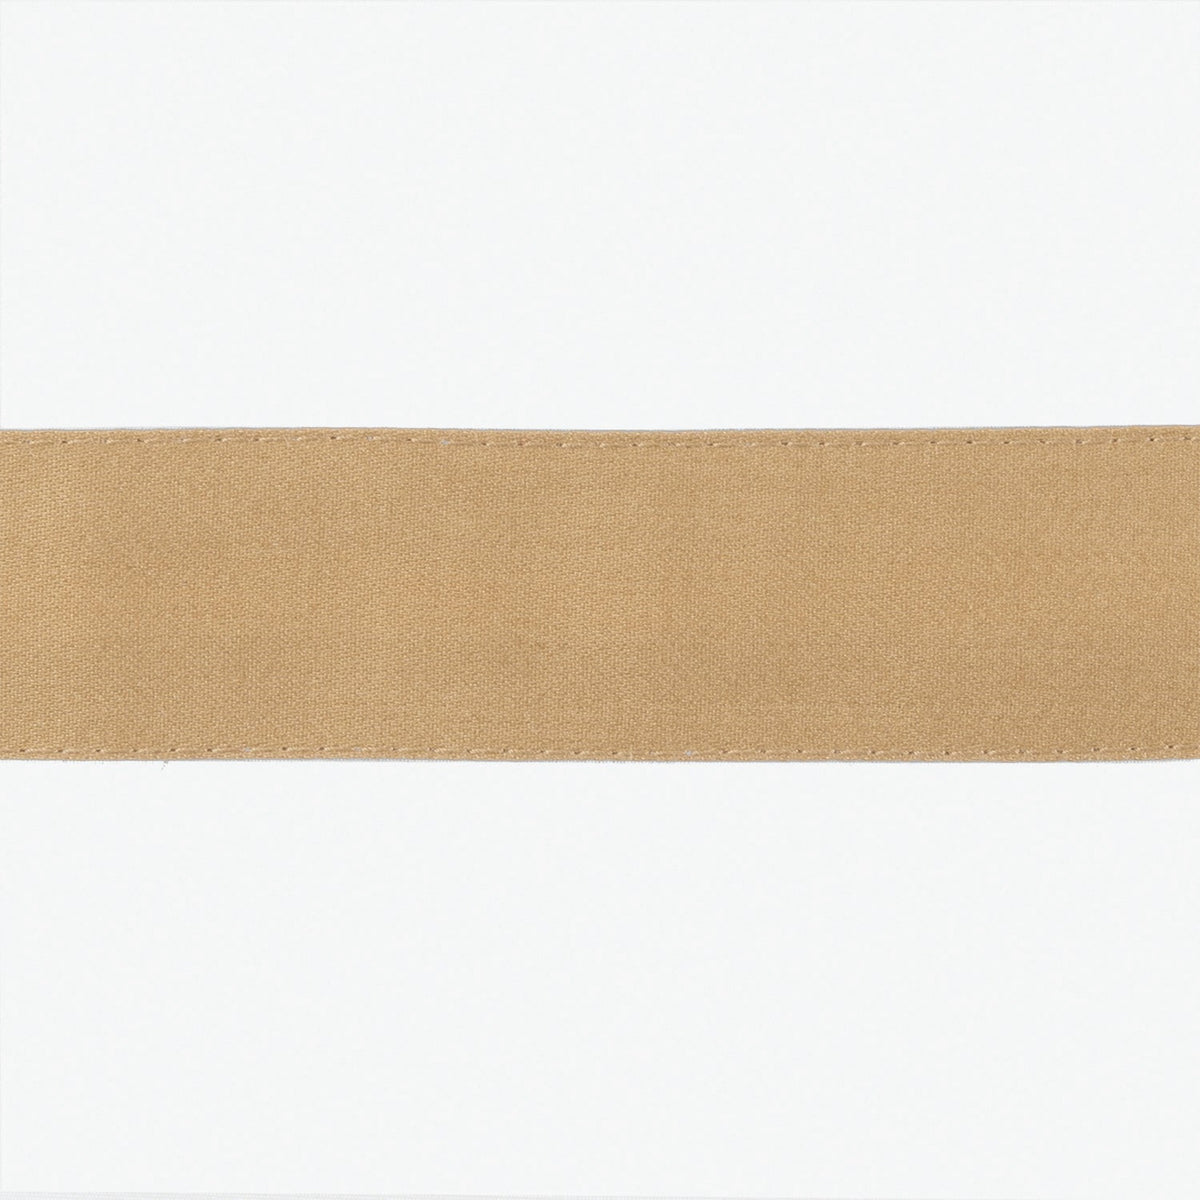 Swatch Sample of Matouk Lowell Tissue Box Cover in Color Bronze